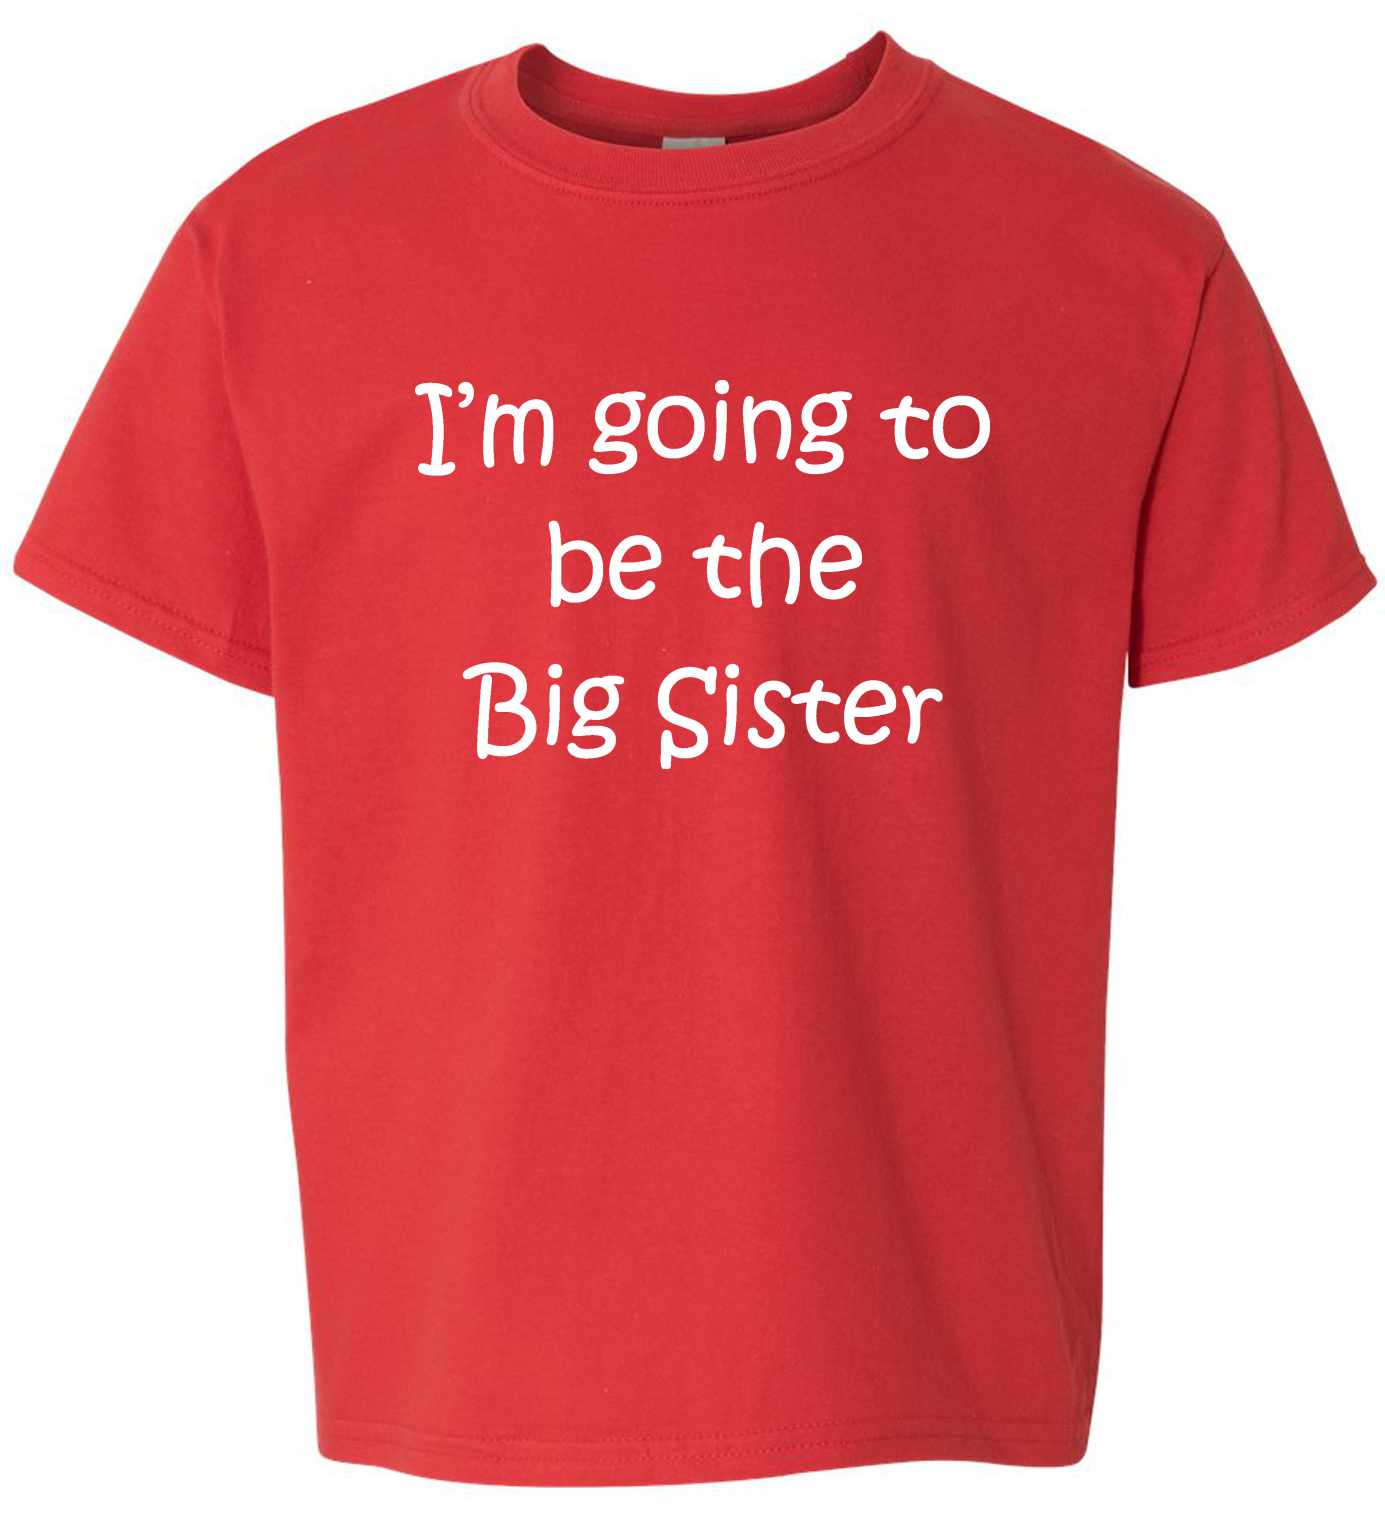 I'M GOING TO BE THE BIG SISTER on Kids T-Shirt